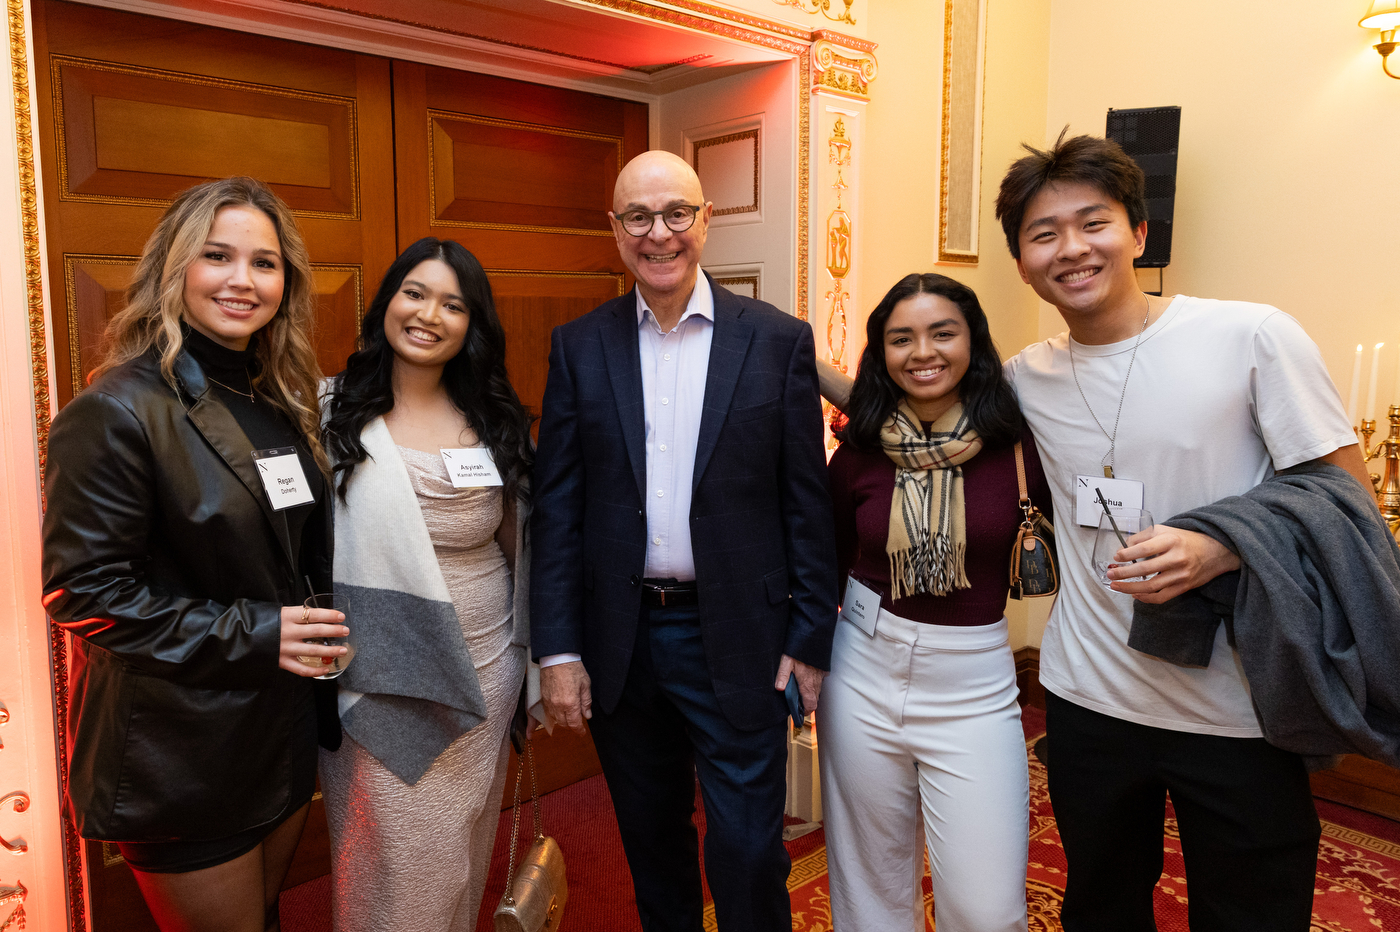 President Aoun poses for a picture with students at Northeastern's Thanksgiving celebration.